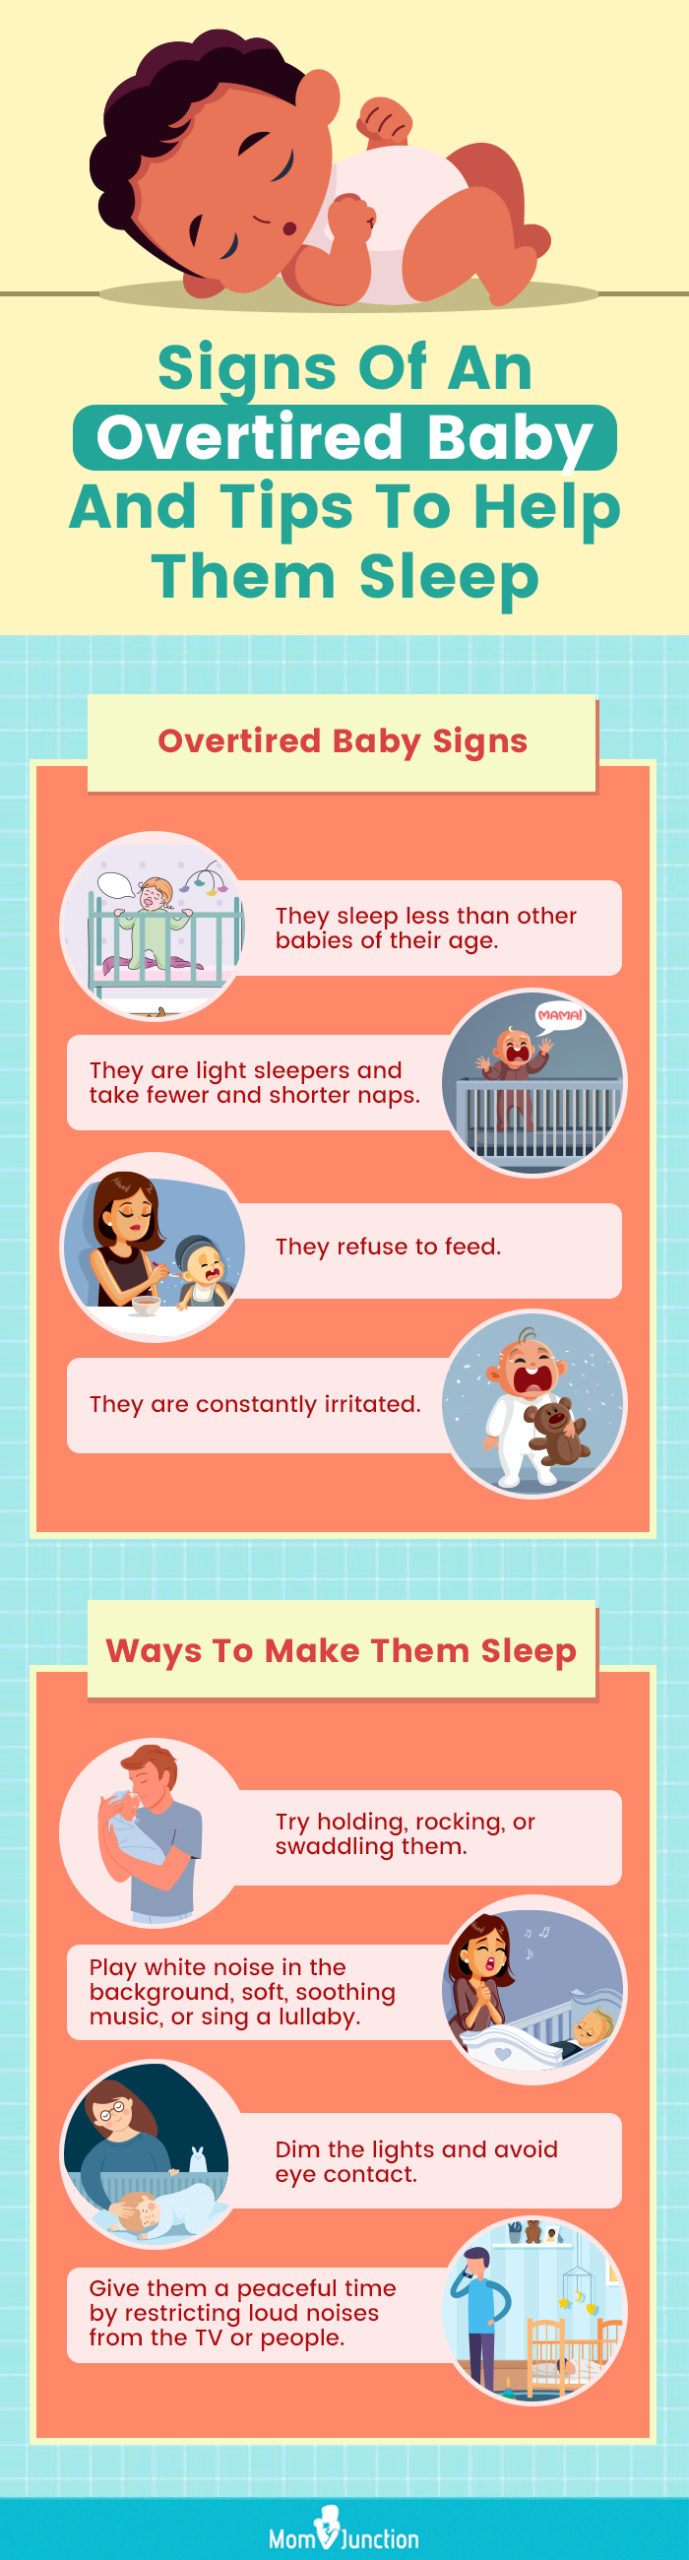 8 Signs Of Overtired Baby And Tips To Put Them To Sleep